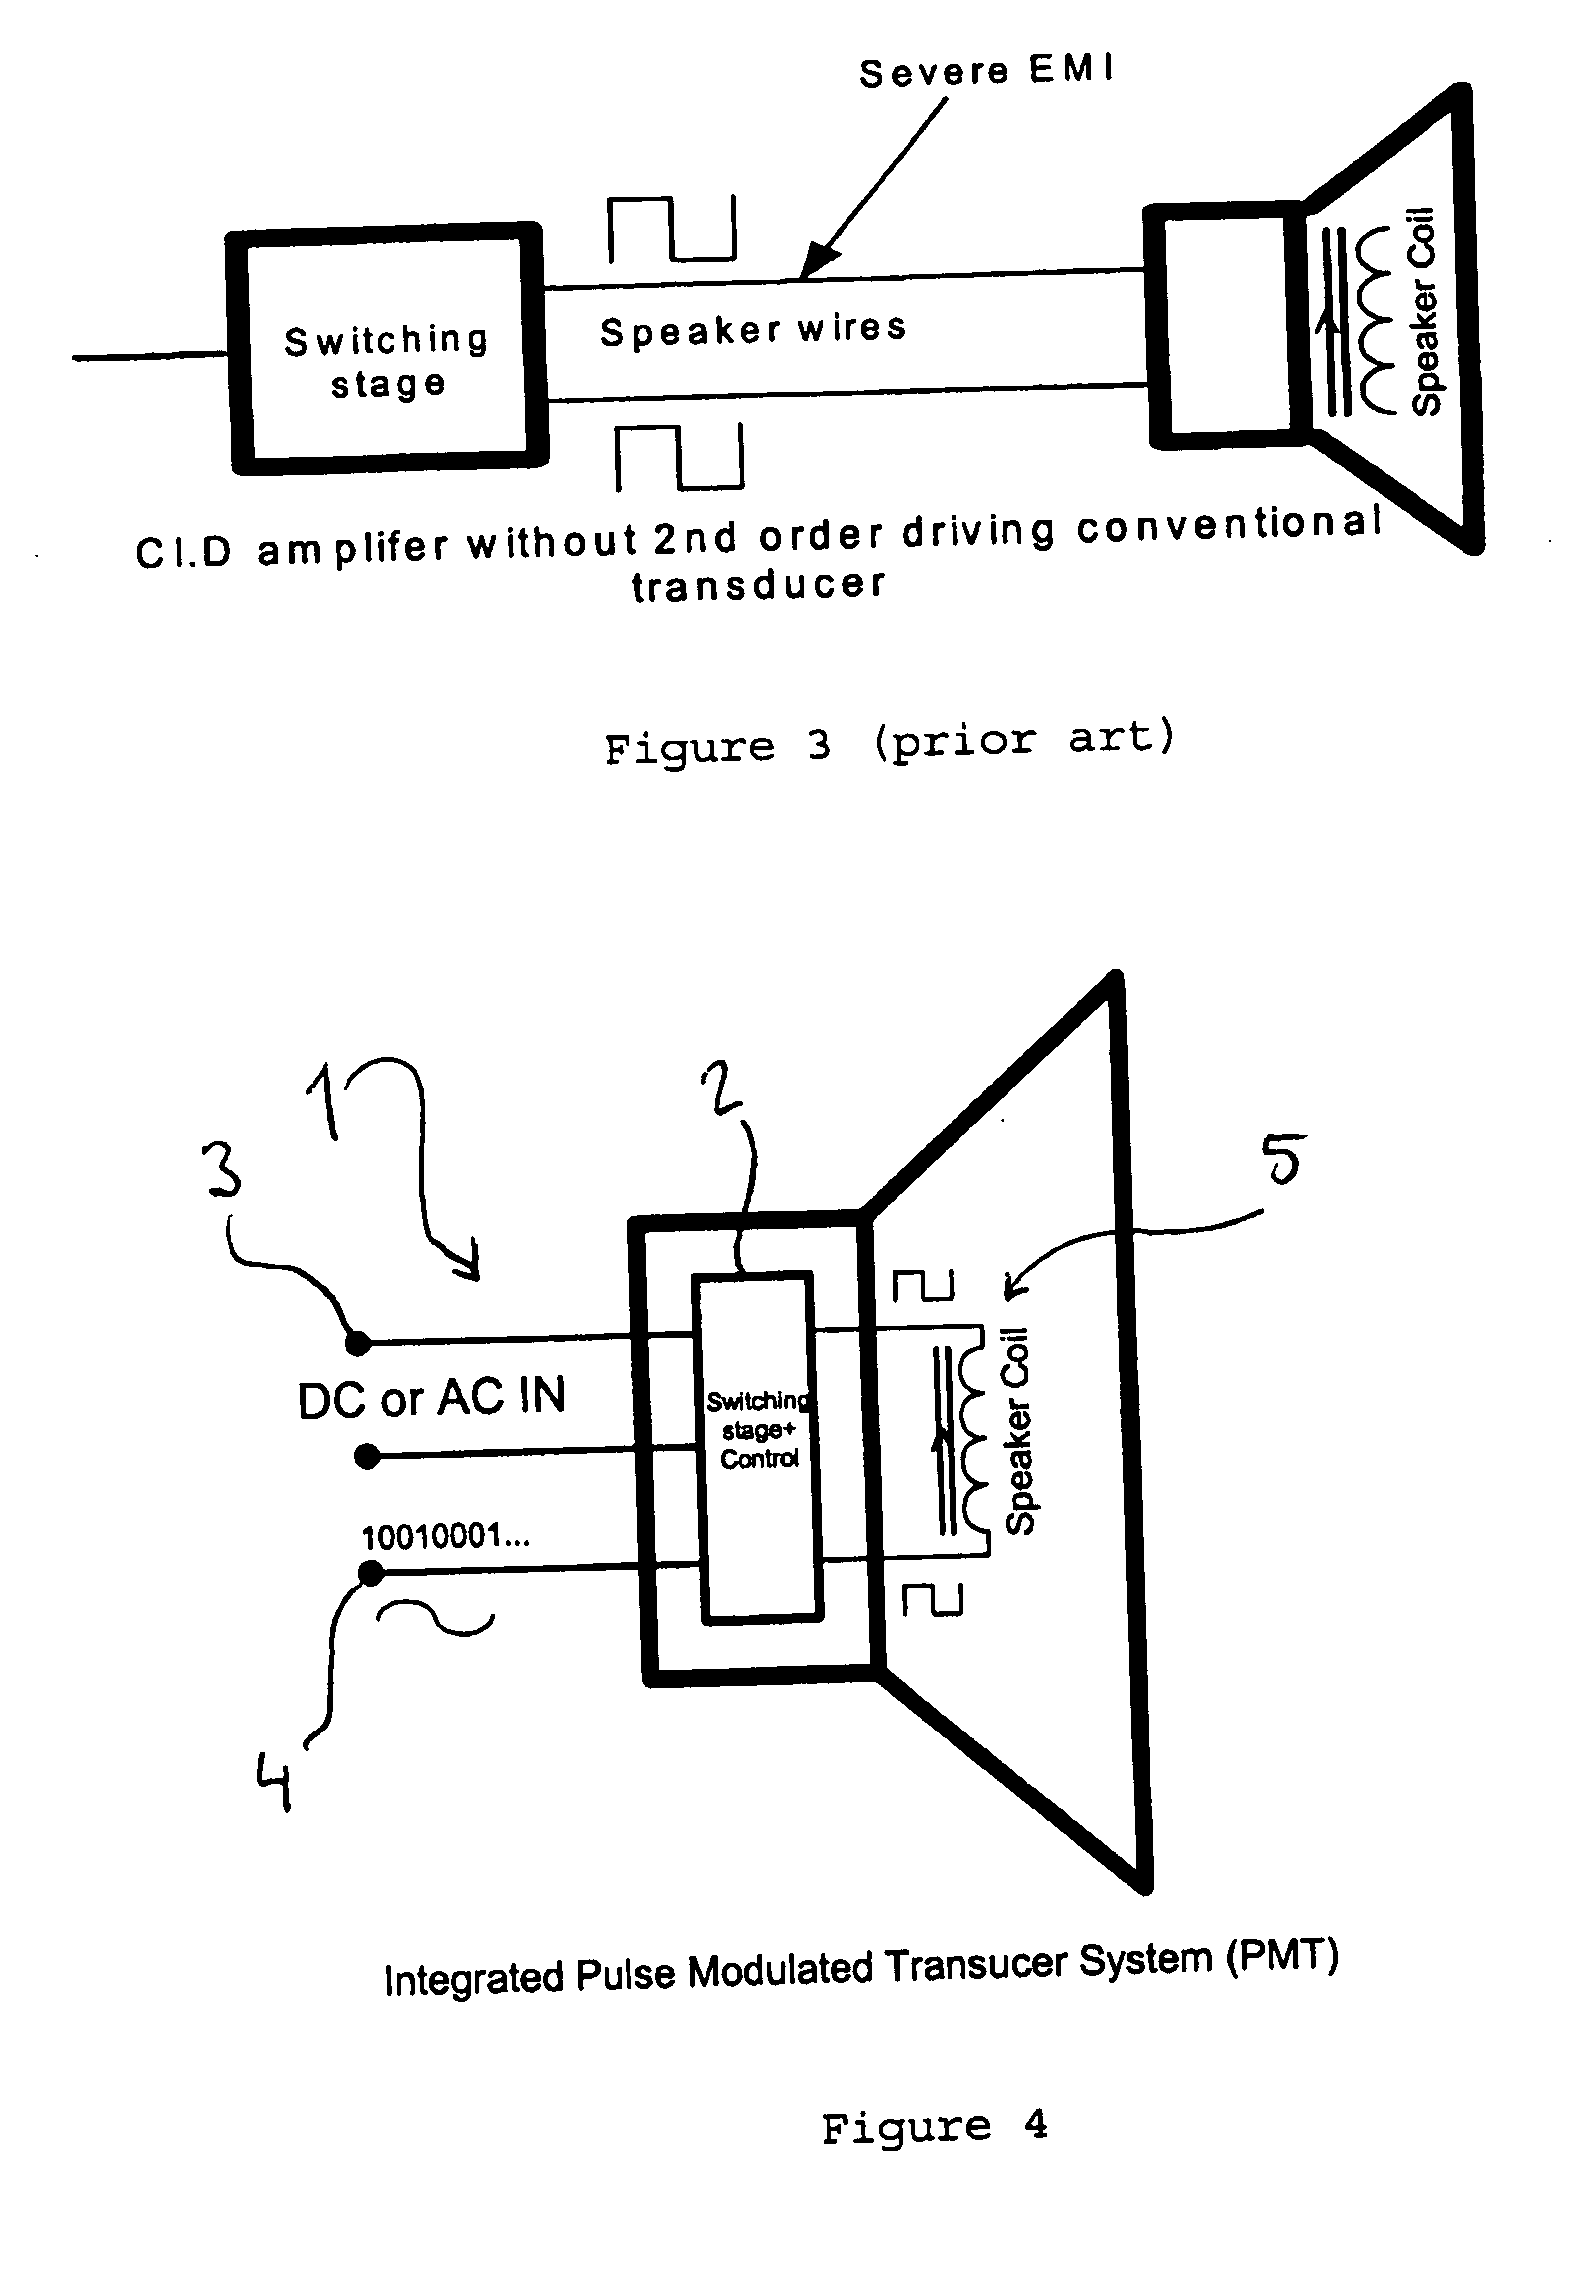 Apparatus for electric to acoustic conversion